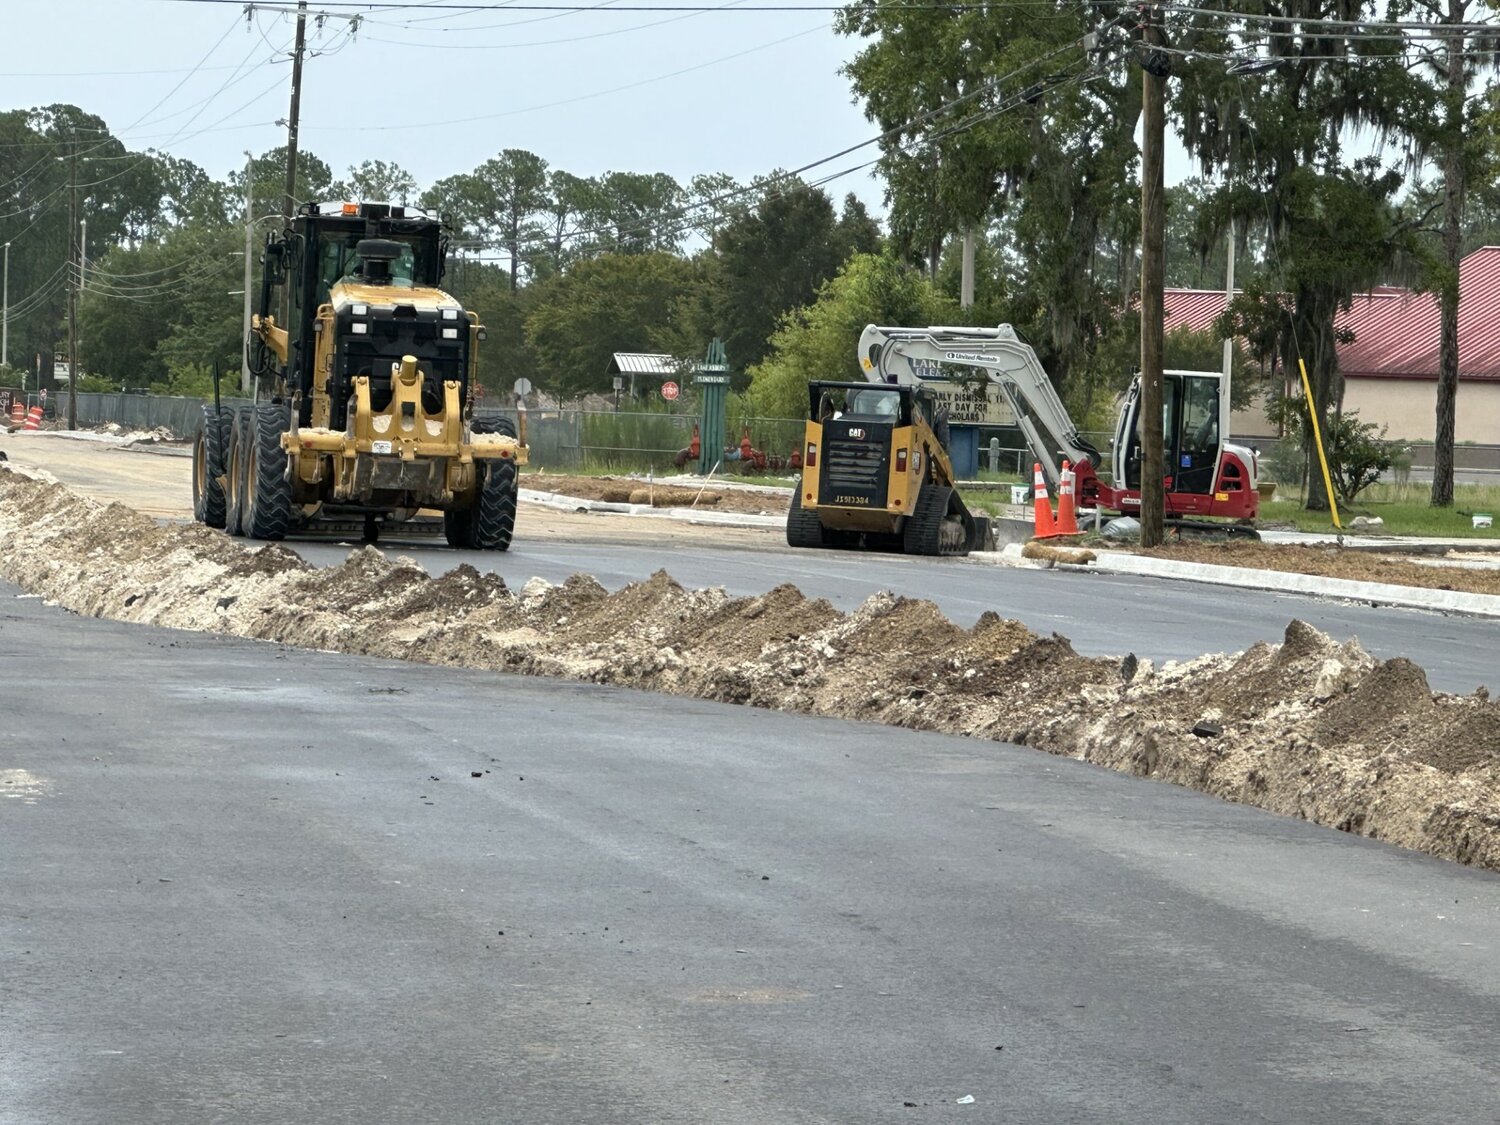 Workers only need to put a final layer of asphalt and add striping to complete the Sandridge Road expansion at the Henley Road intersection. The barriers will be removed at Eagle Haven Drive and Jubilee Lane at 11 p.m. on July 30, and work will immediately move to start the 
second phase from Lake Asbury Elementary to Russell Road Baptist Church the next day.